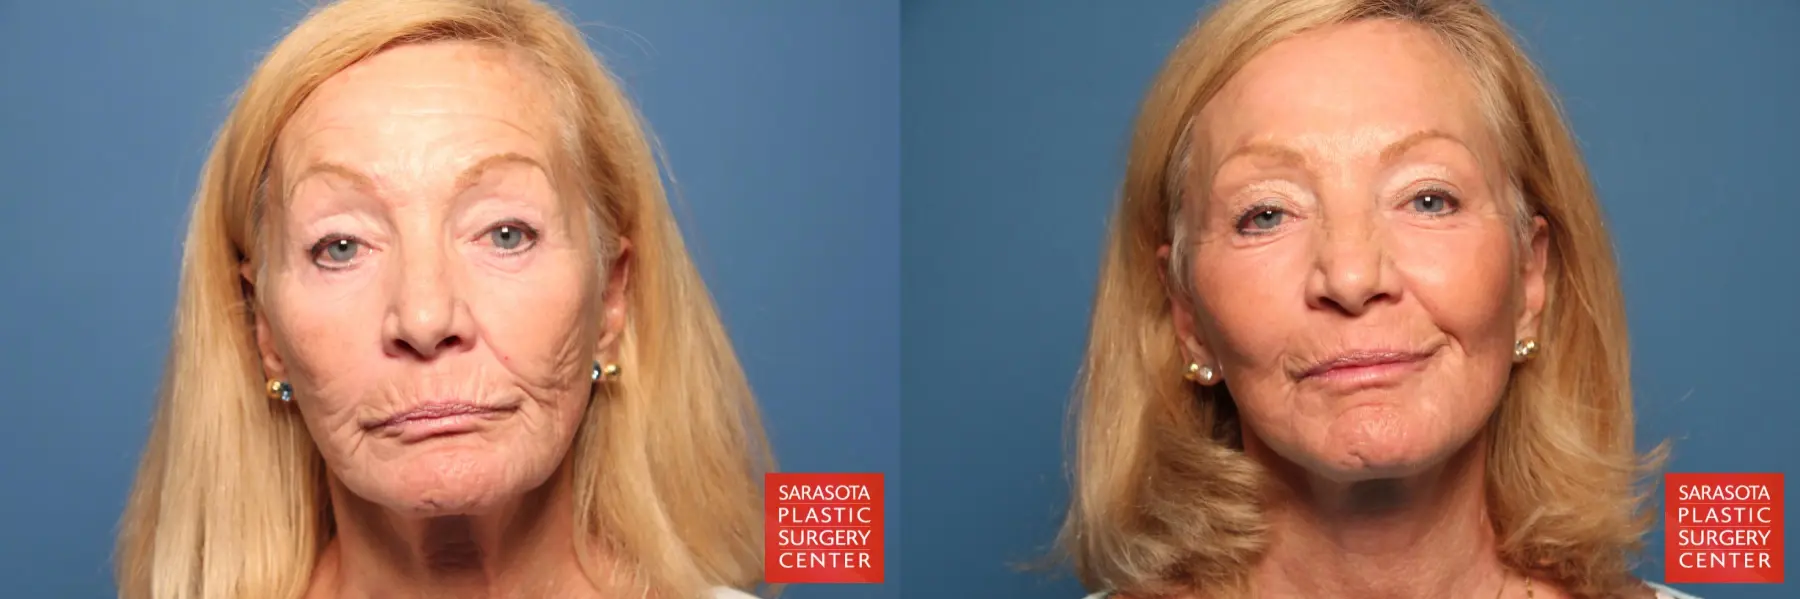 Cheek Lift: Patient 5 - Before and After 1